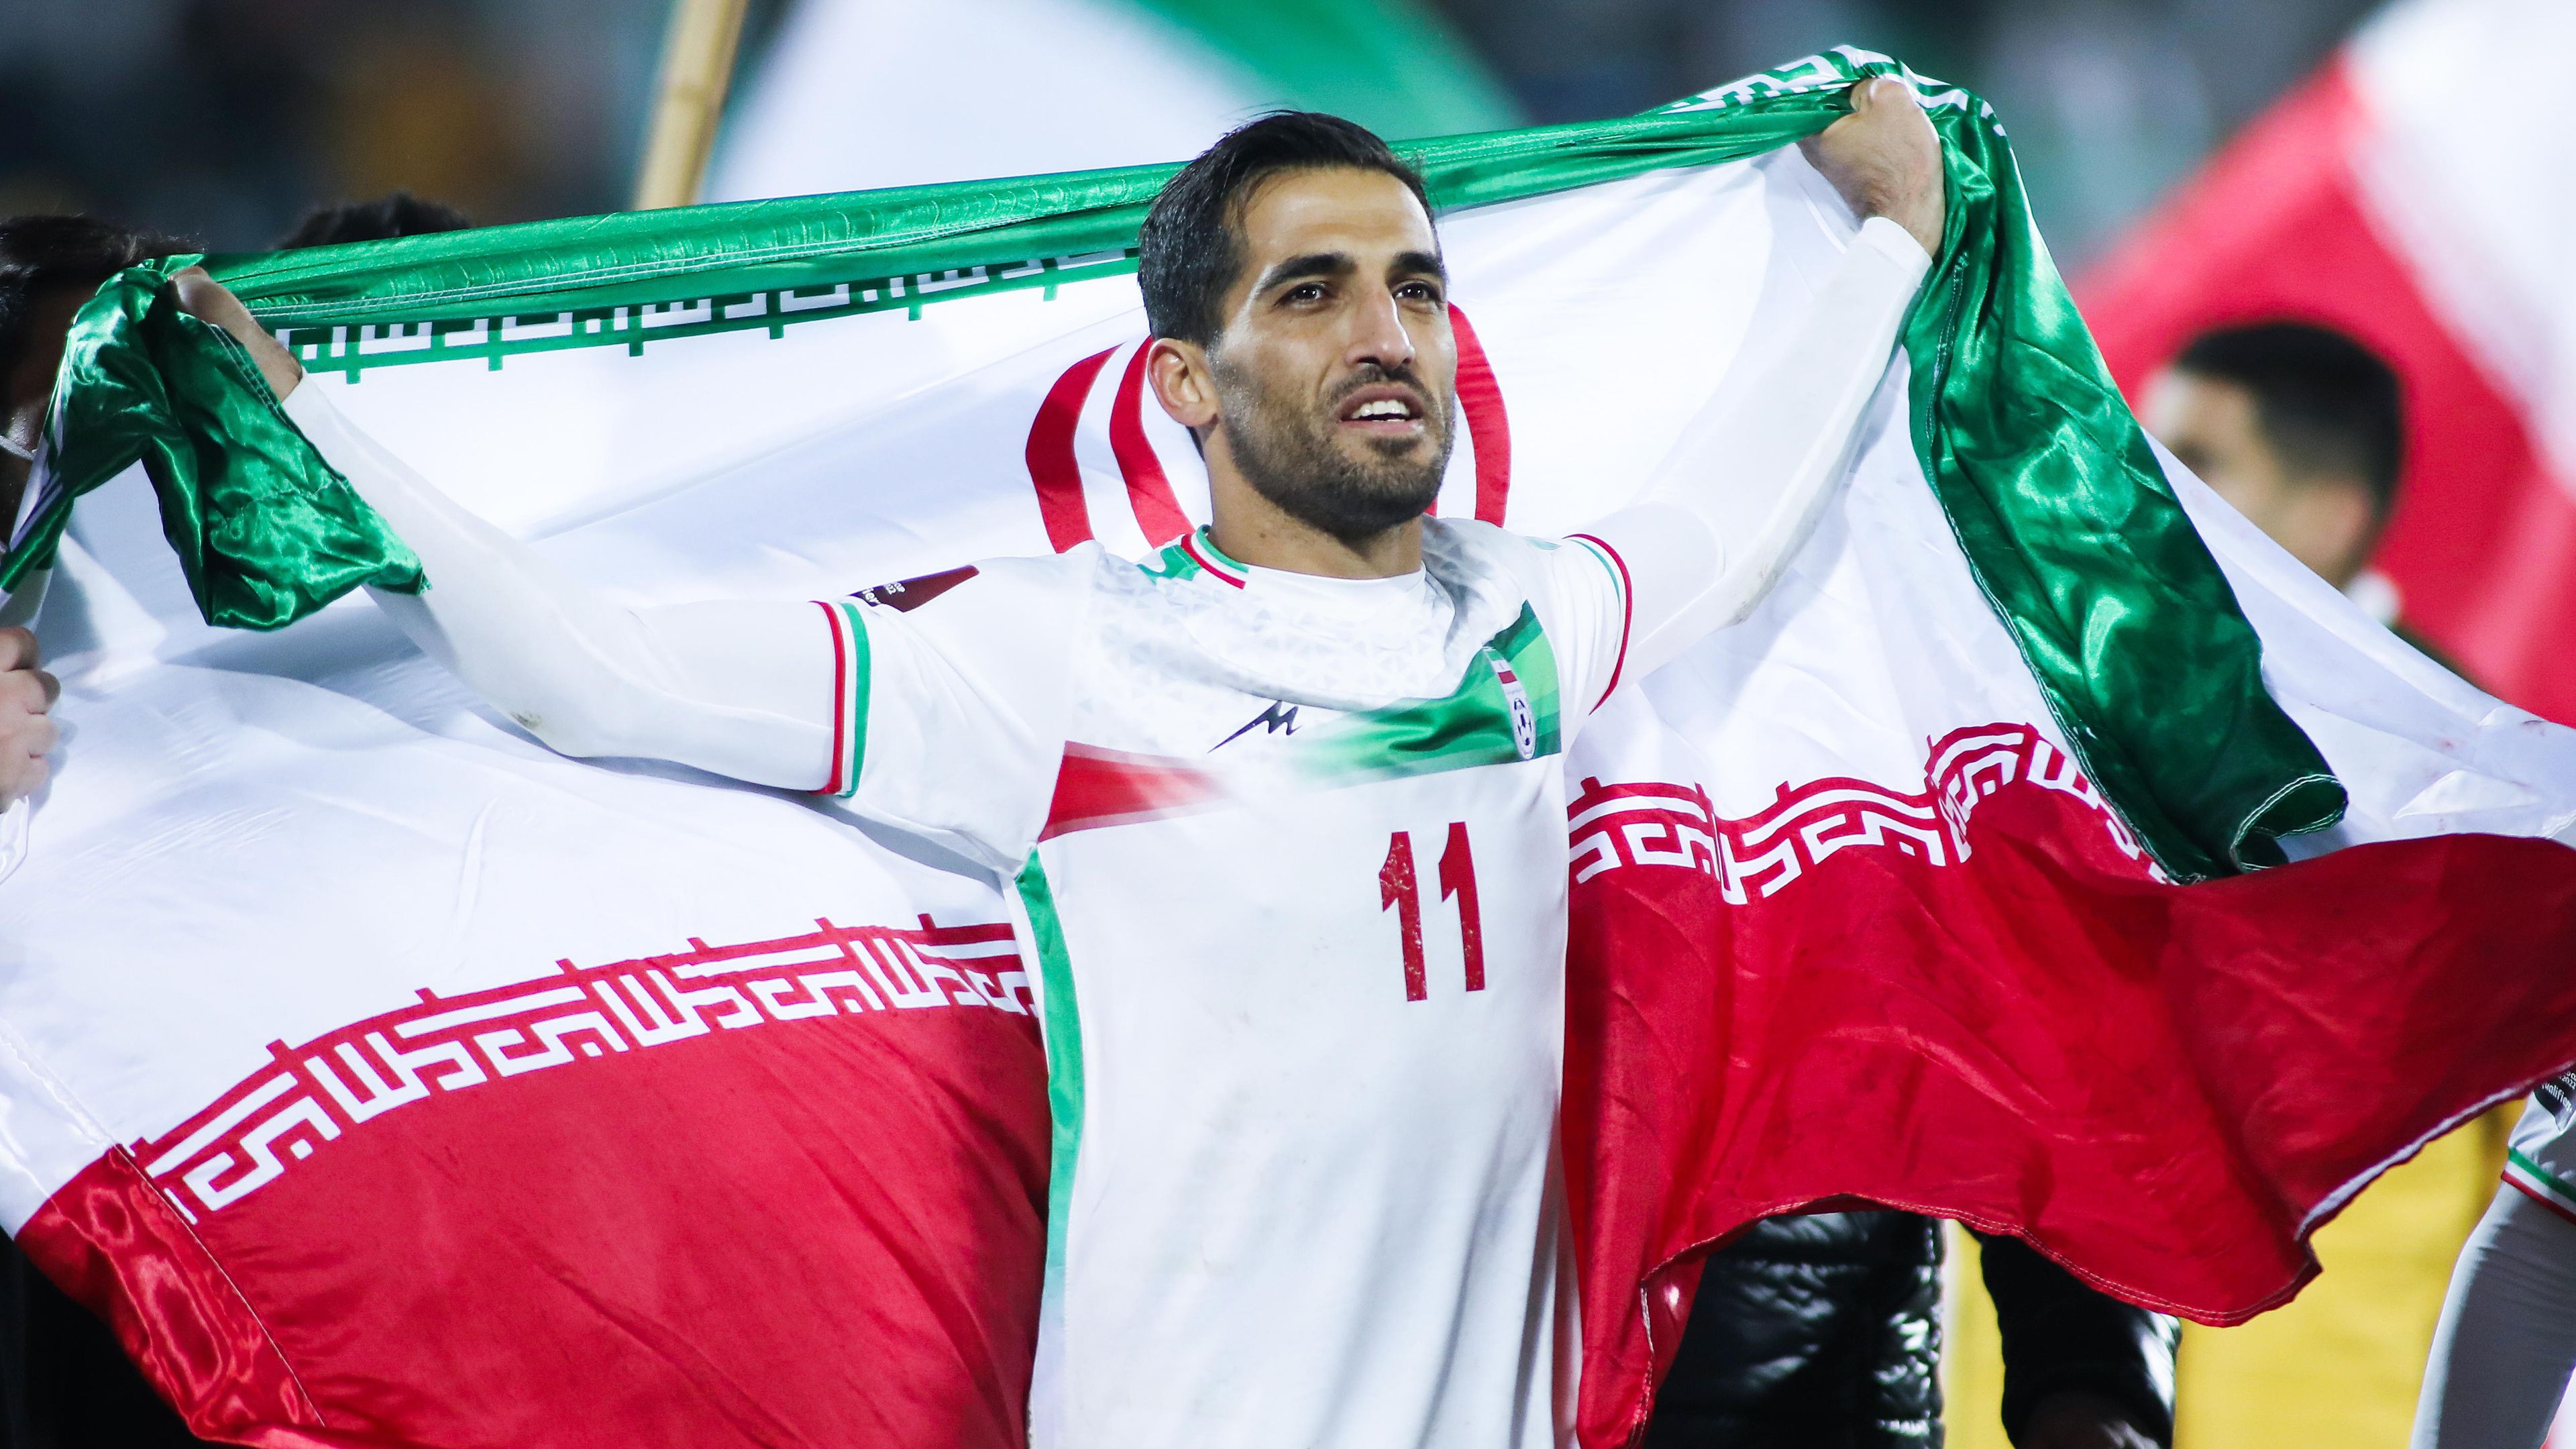 Vahid Amiri of Iran celebrates after the victory  the FIFA World Cup Qualifier match between Iran and Iraq at Azadi Stadium on January 27, 2022 in Tehran, Iran. (Photo by Mohammad Karamali/vi/DeFodi Images via Getty Images)